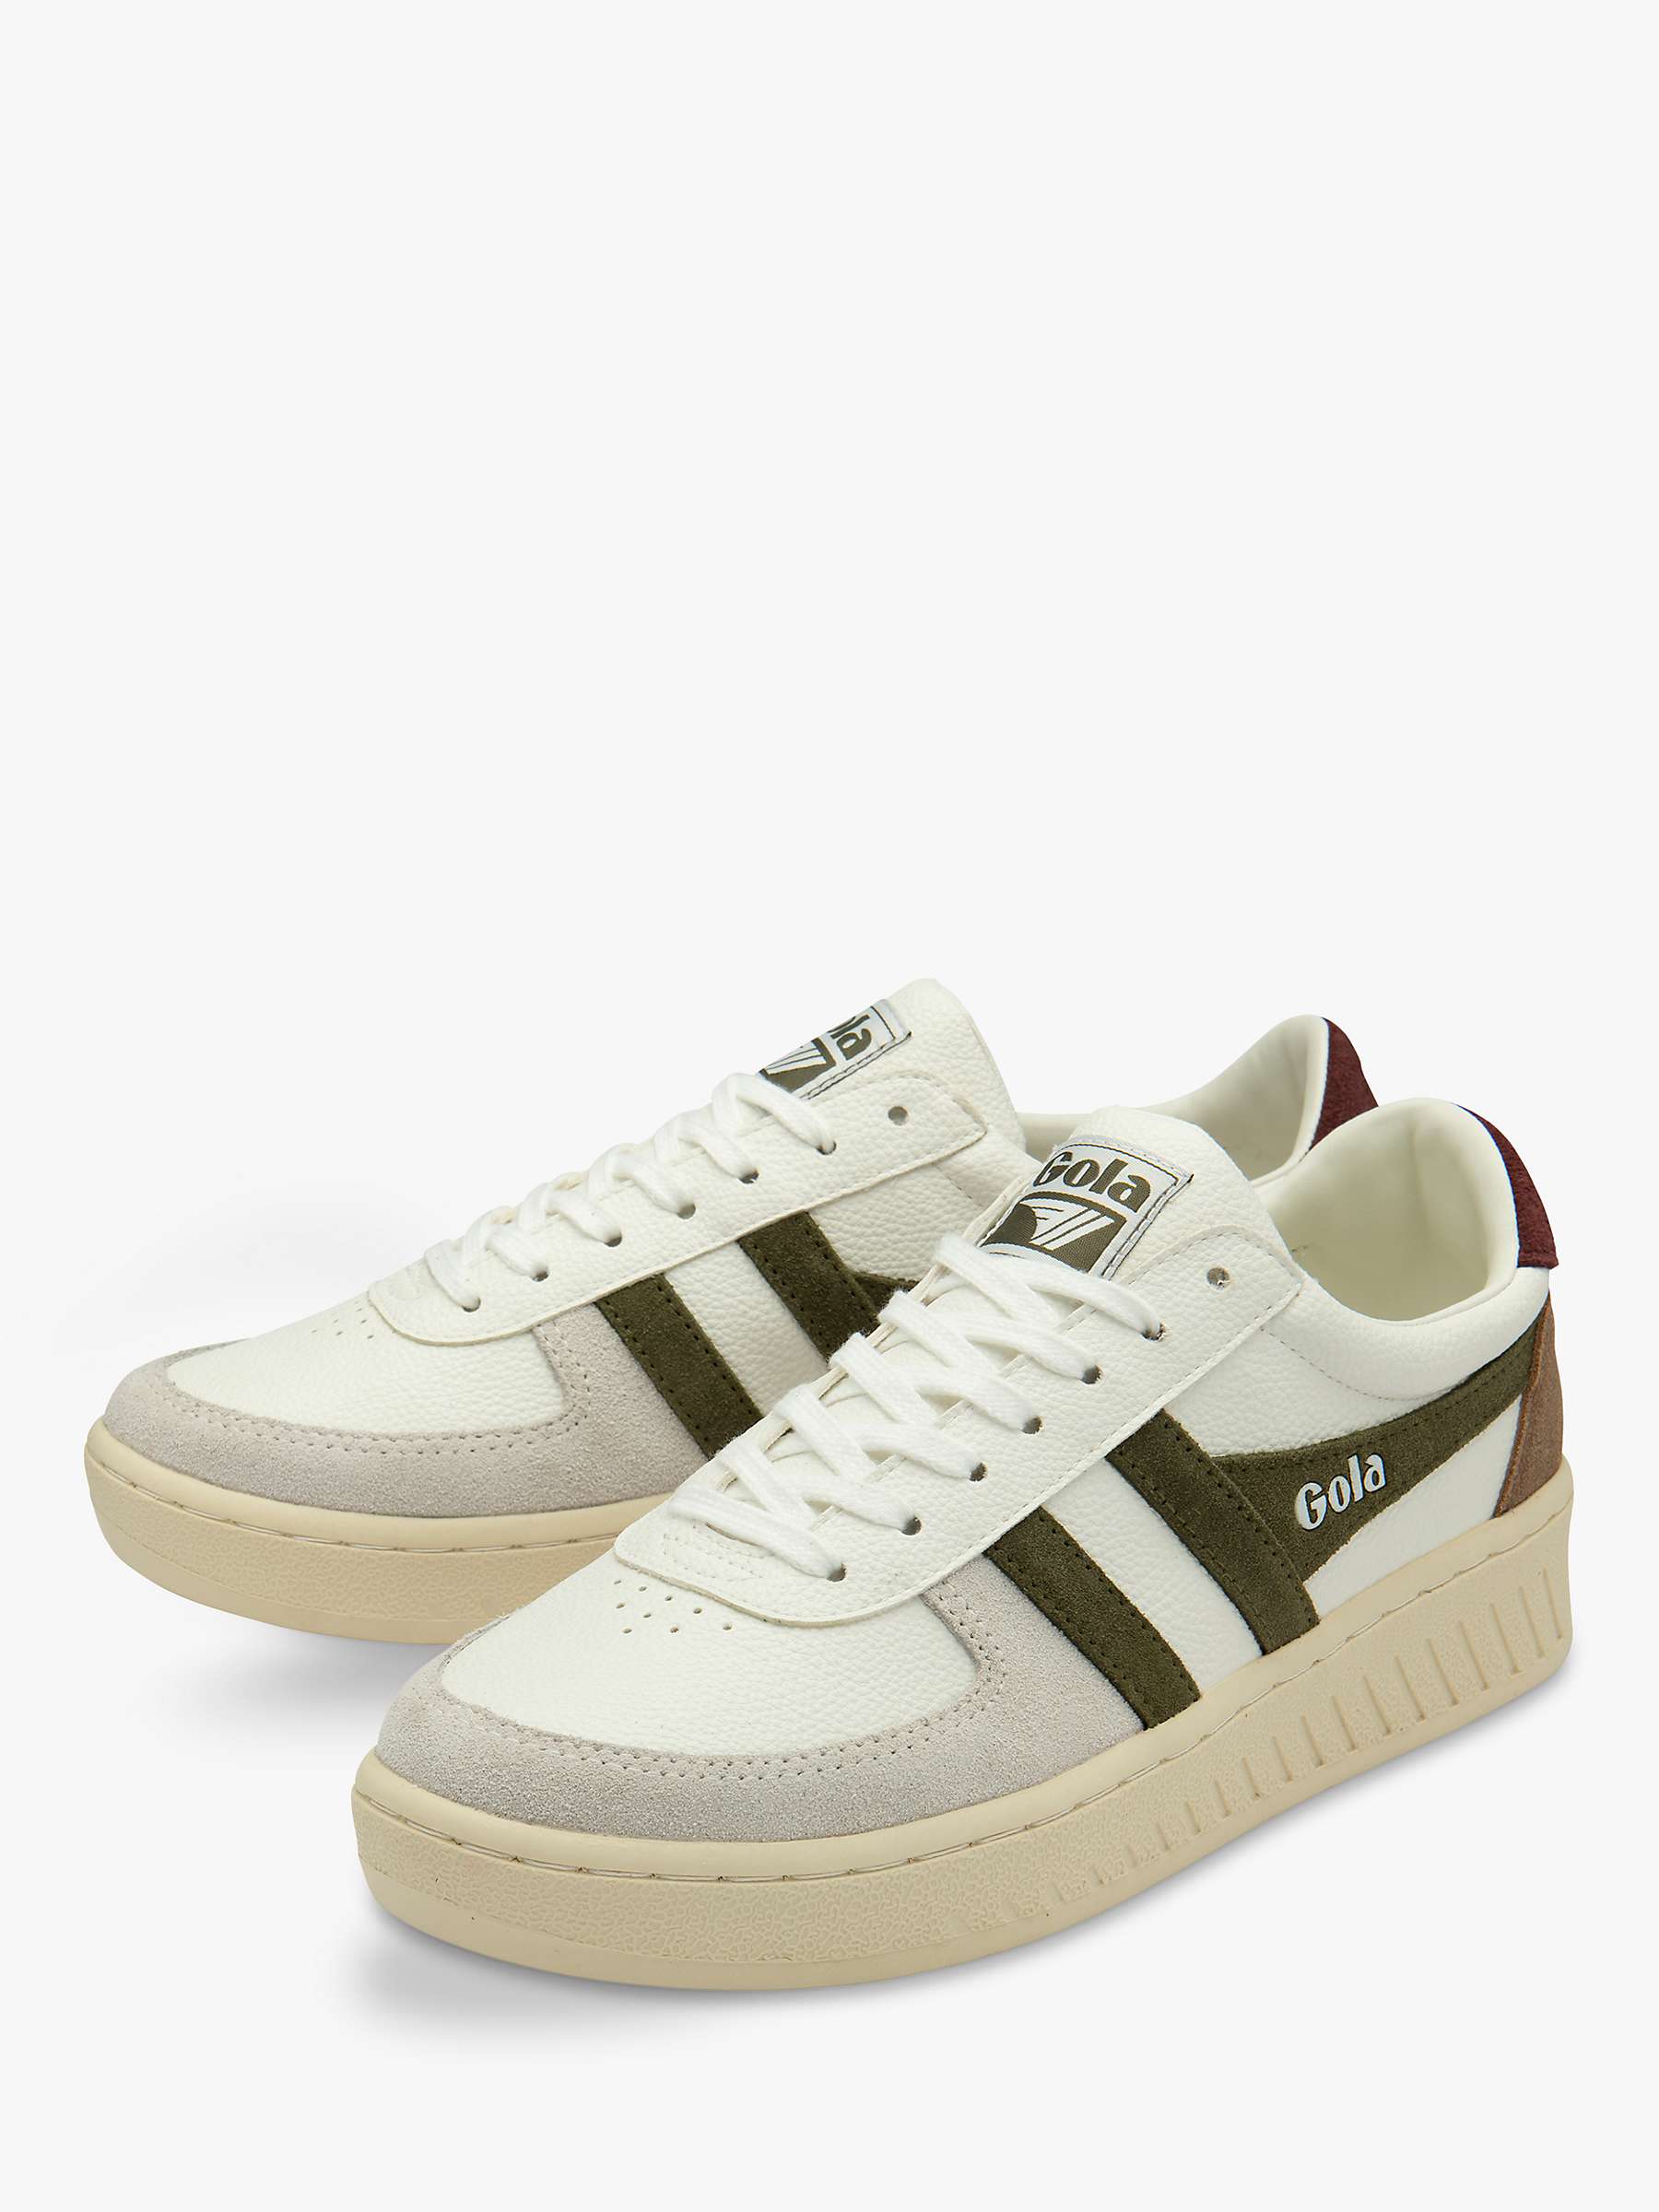 Buy Gola Grandslam Trident Lace Up Trainers Online at johnlewis.com